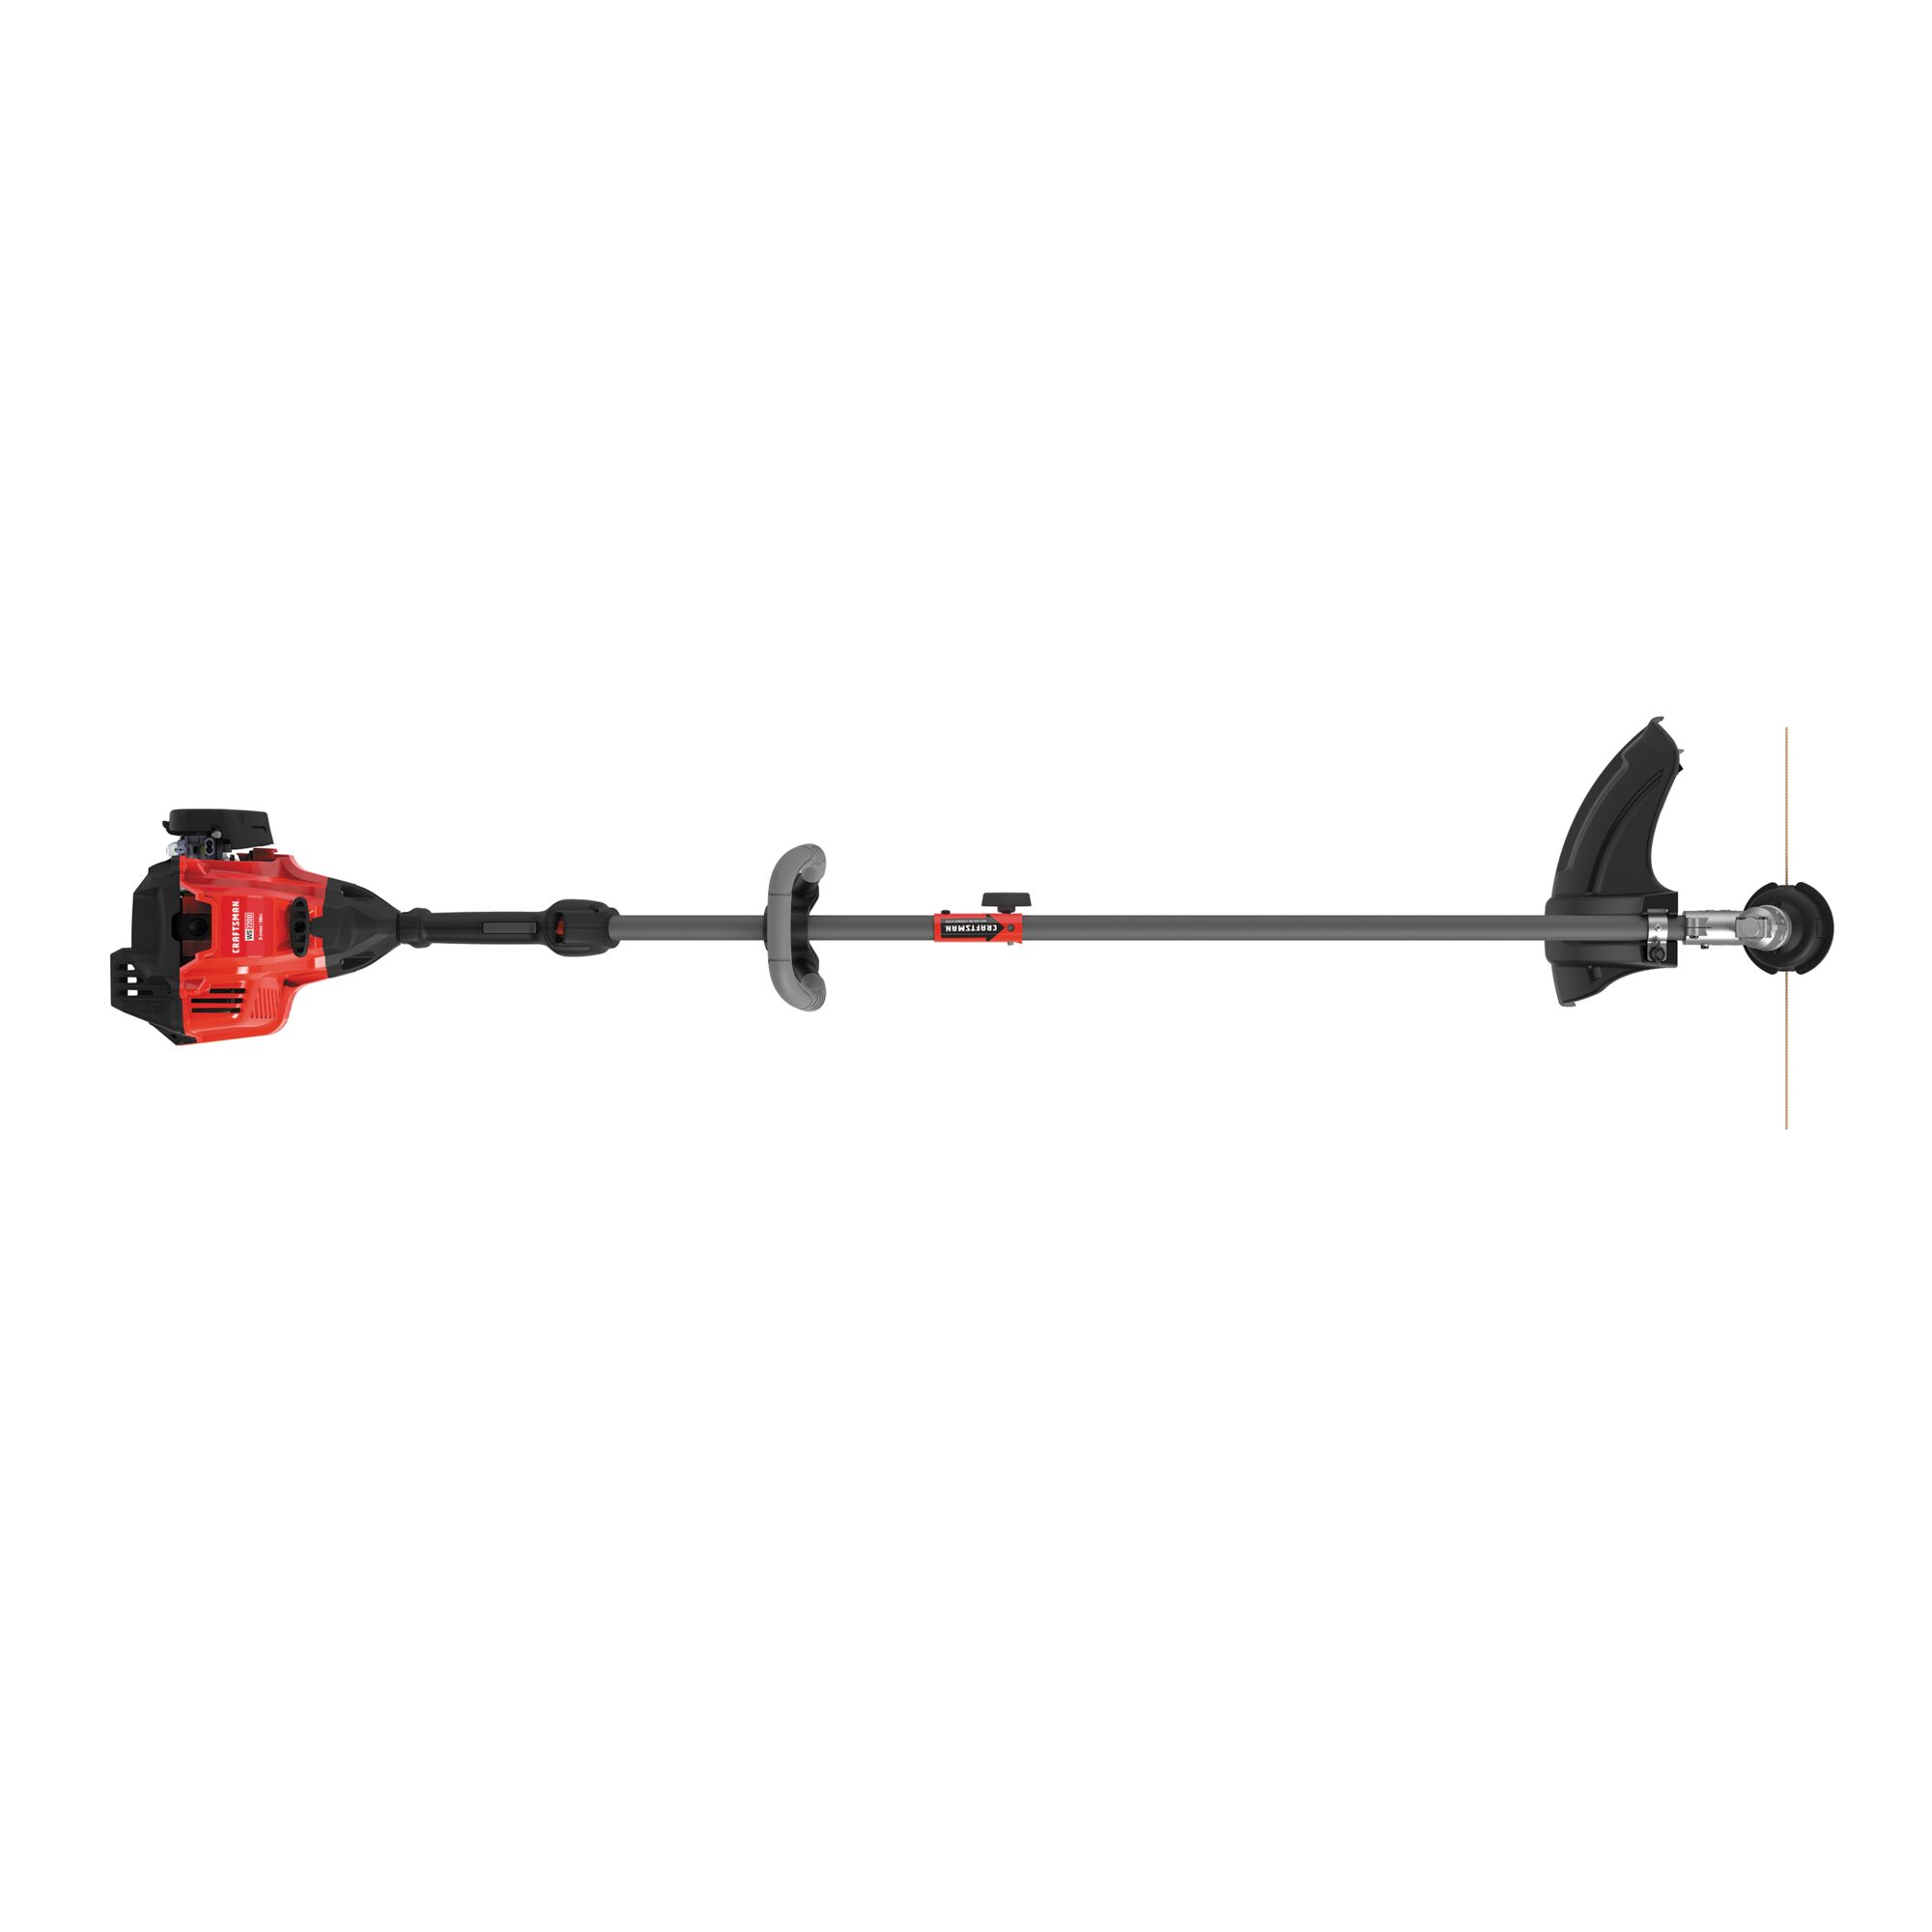 Profile of W S 2200 weedwacker 25 C C 2 cycle 17 inch attachment capable straight shaft gas trimmer.